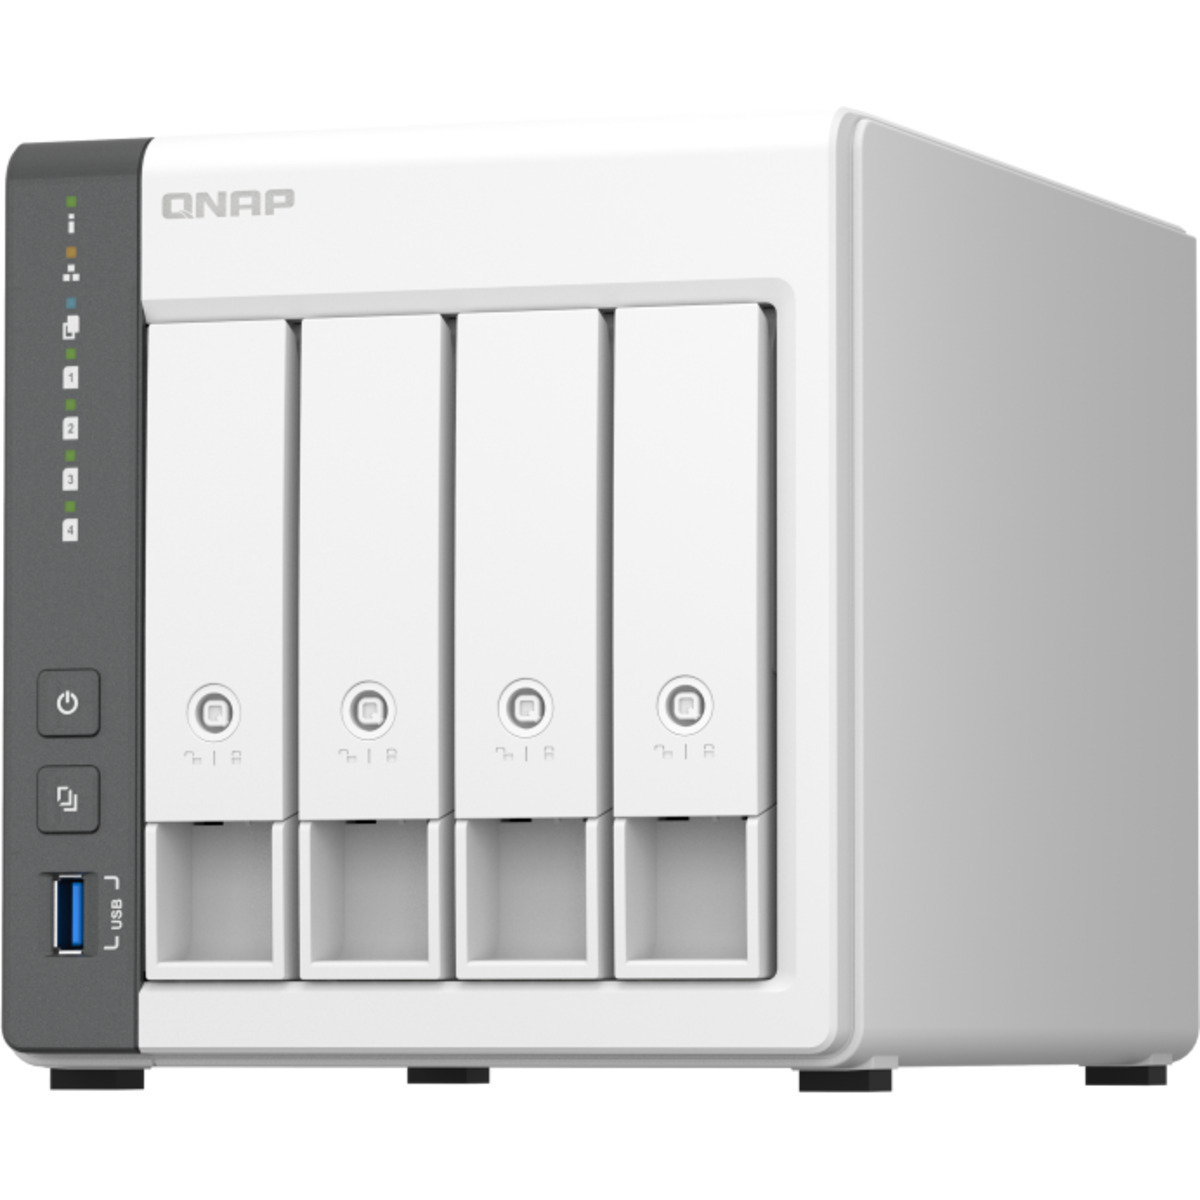 QNAP TS-433 NAS - Network Attached Storage Device Burn-In Tested Configurations